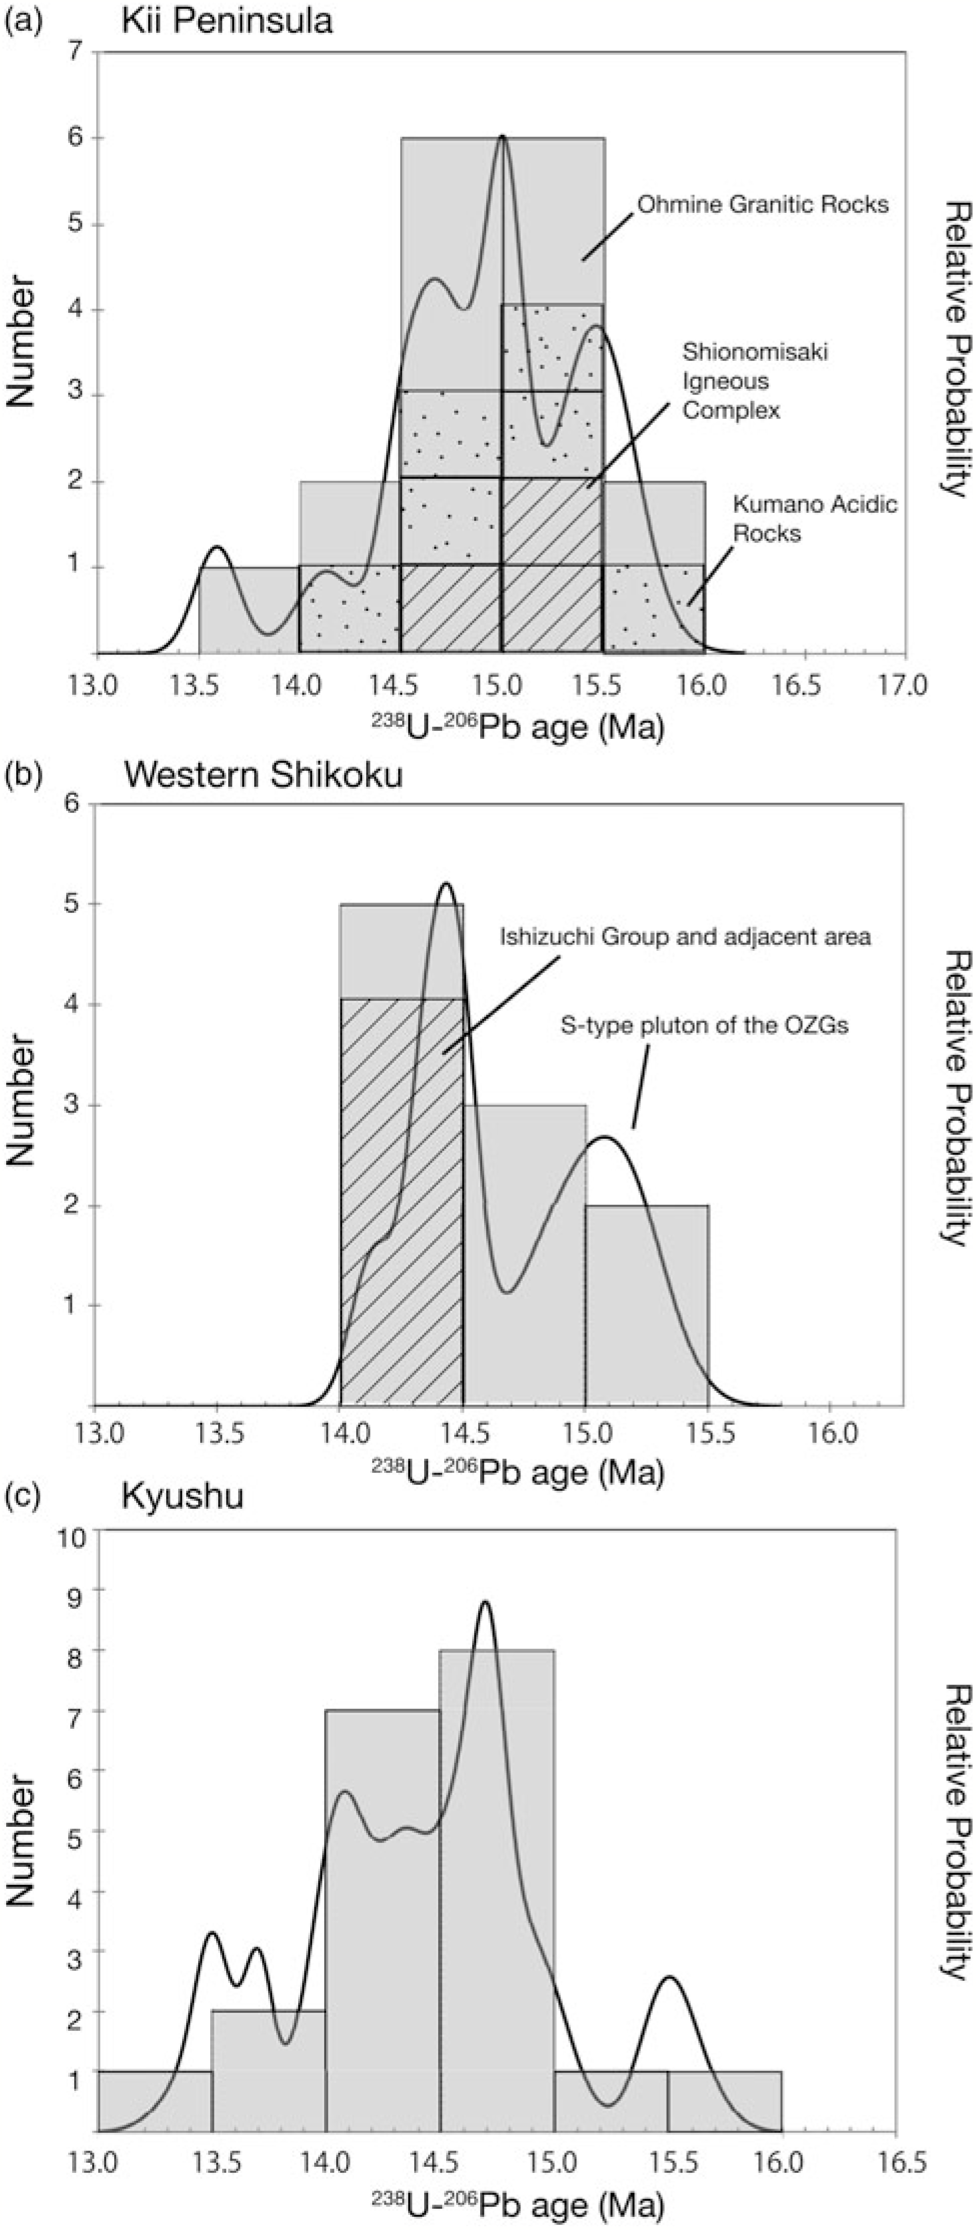 U Pb Ages Of Miocene Near Trench Granitic Rocks Of The Southwest Japan Arc Implications For Magmatism Related To Hot Subduction Geological Magazine Cambridge Core